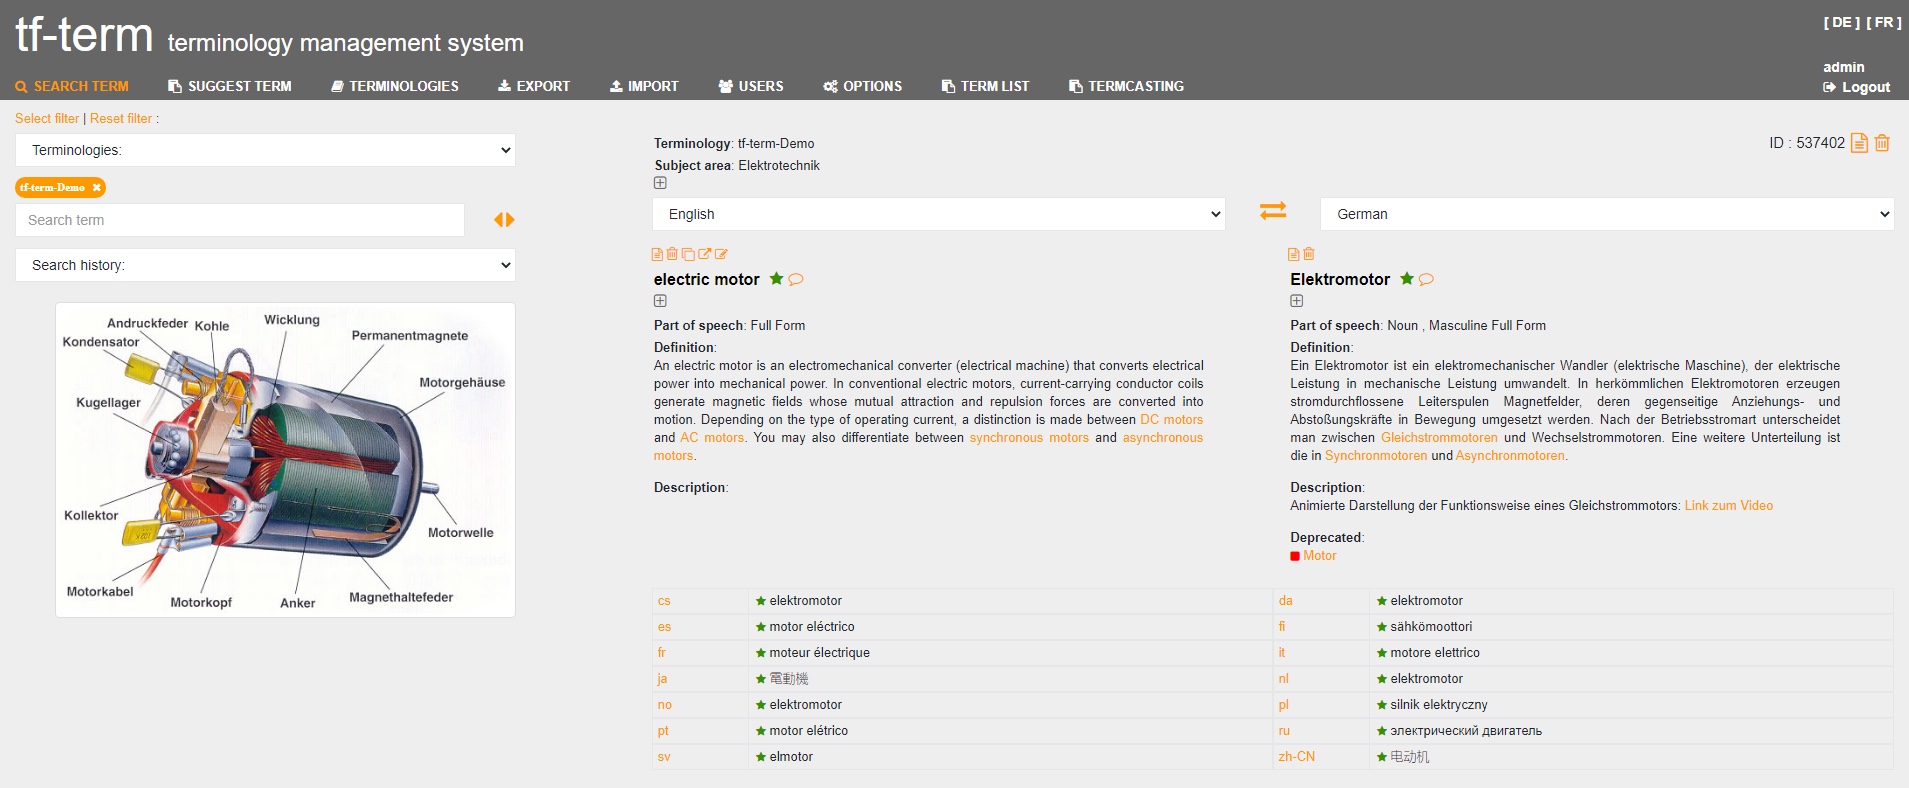 The tf-term terminology database, developed by text&form.